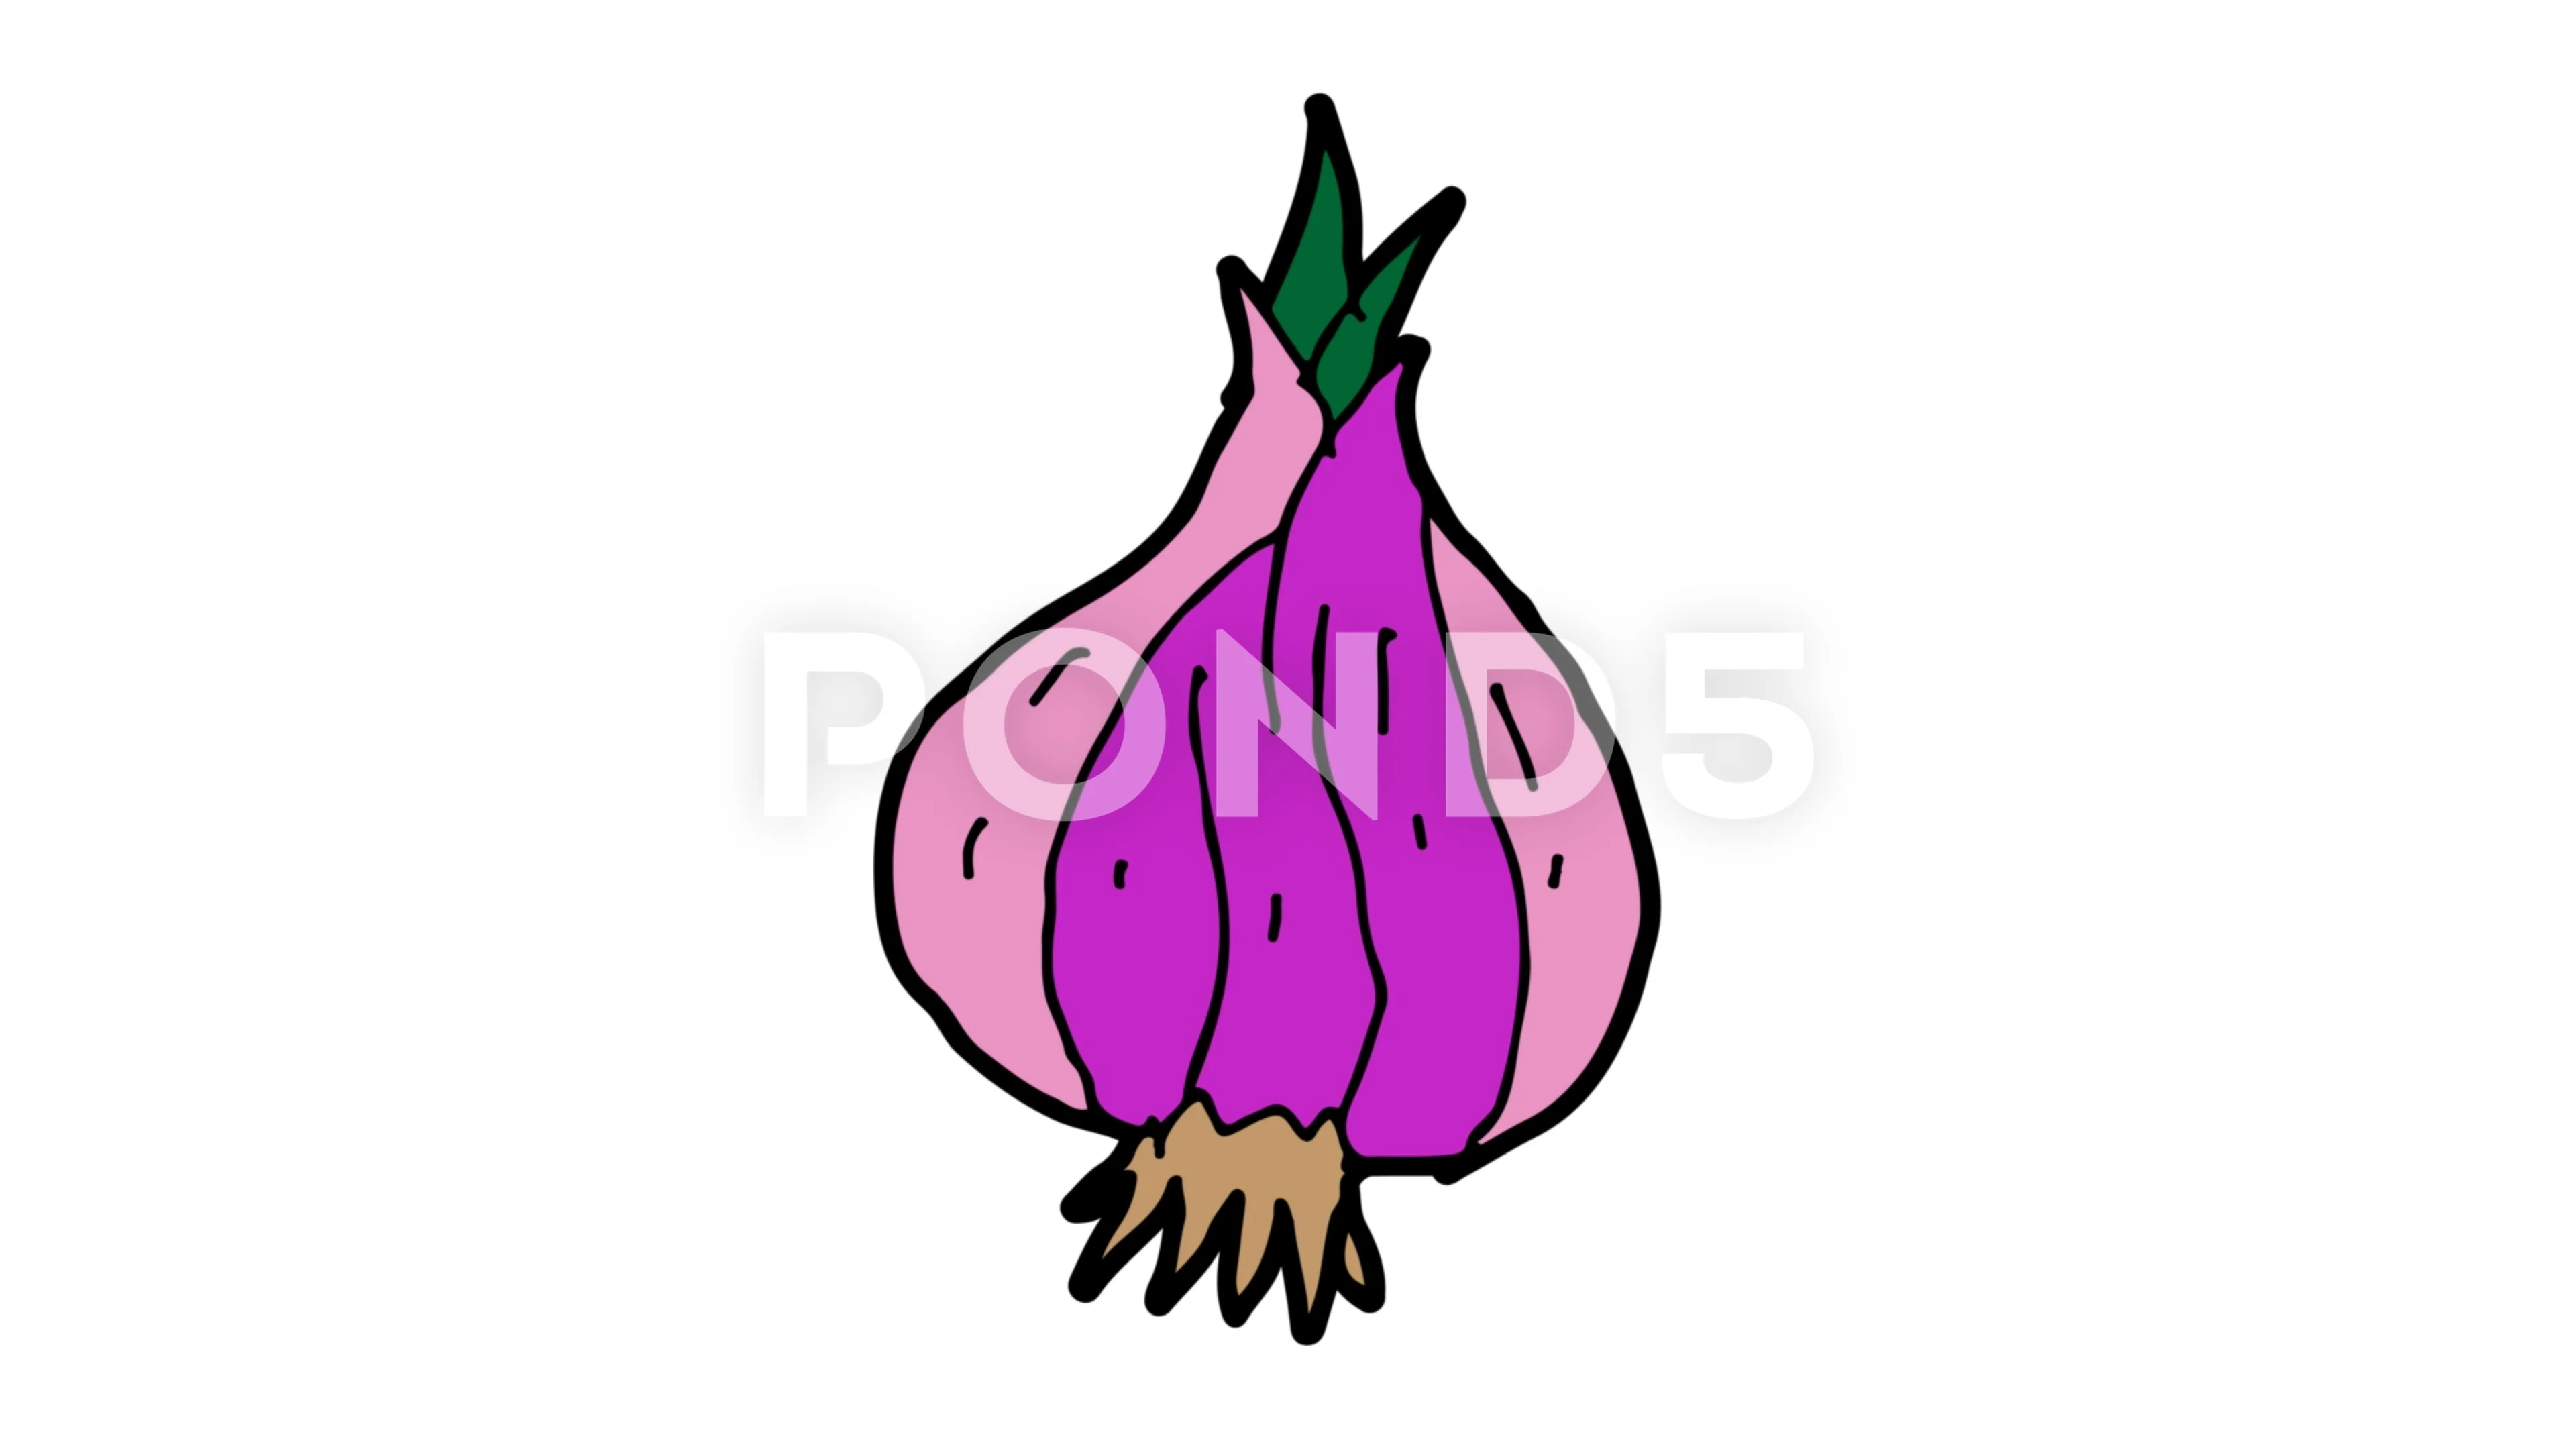 How to Draw a Onion? | Step by Step Onion Drawing for Kids